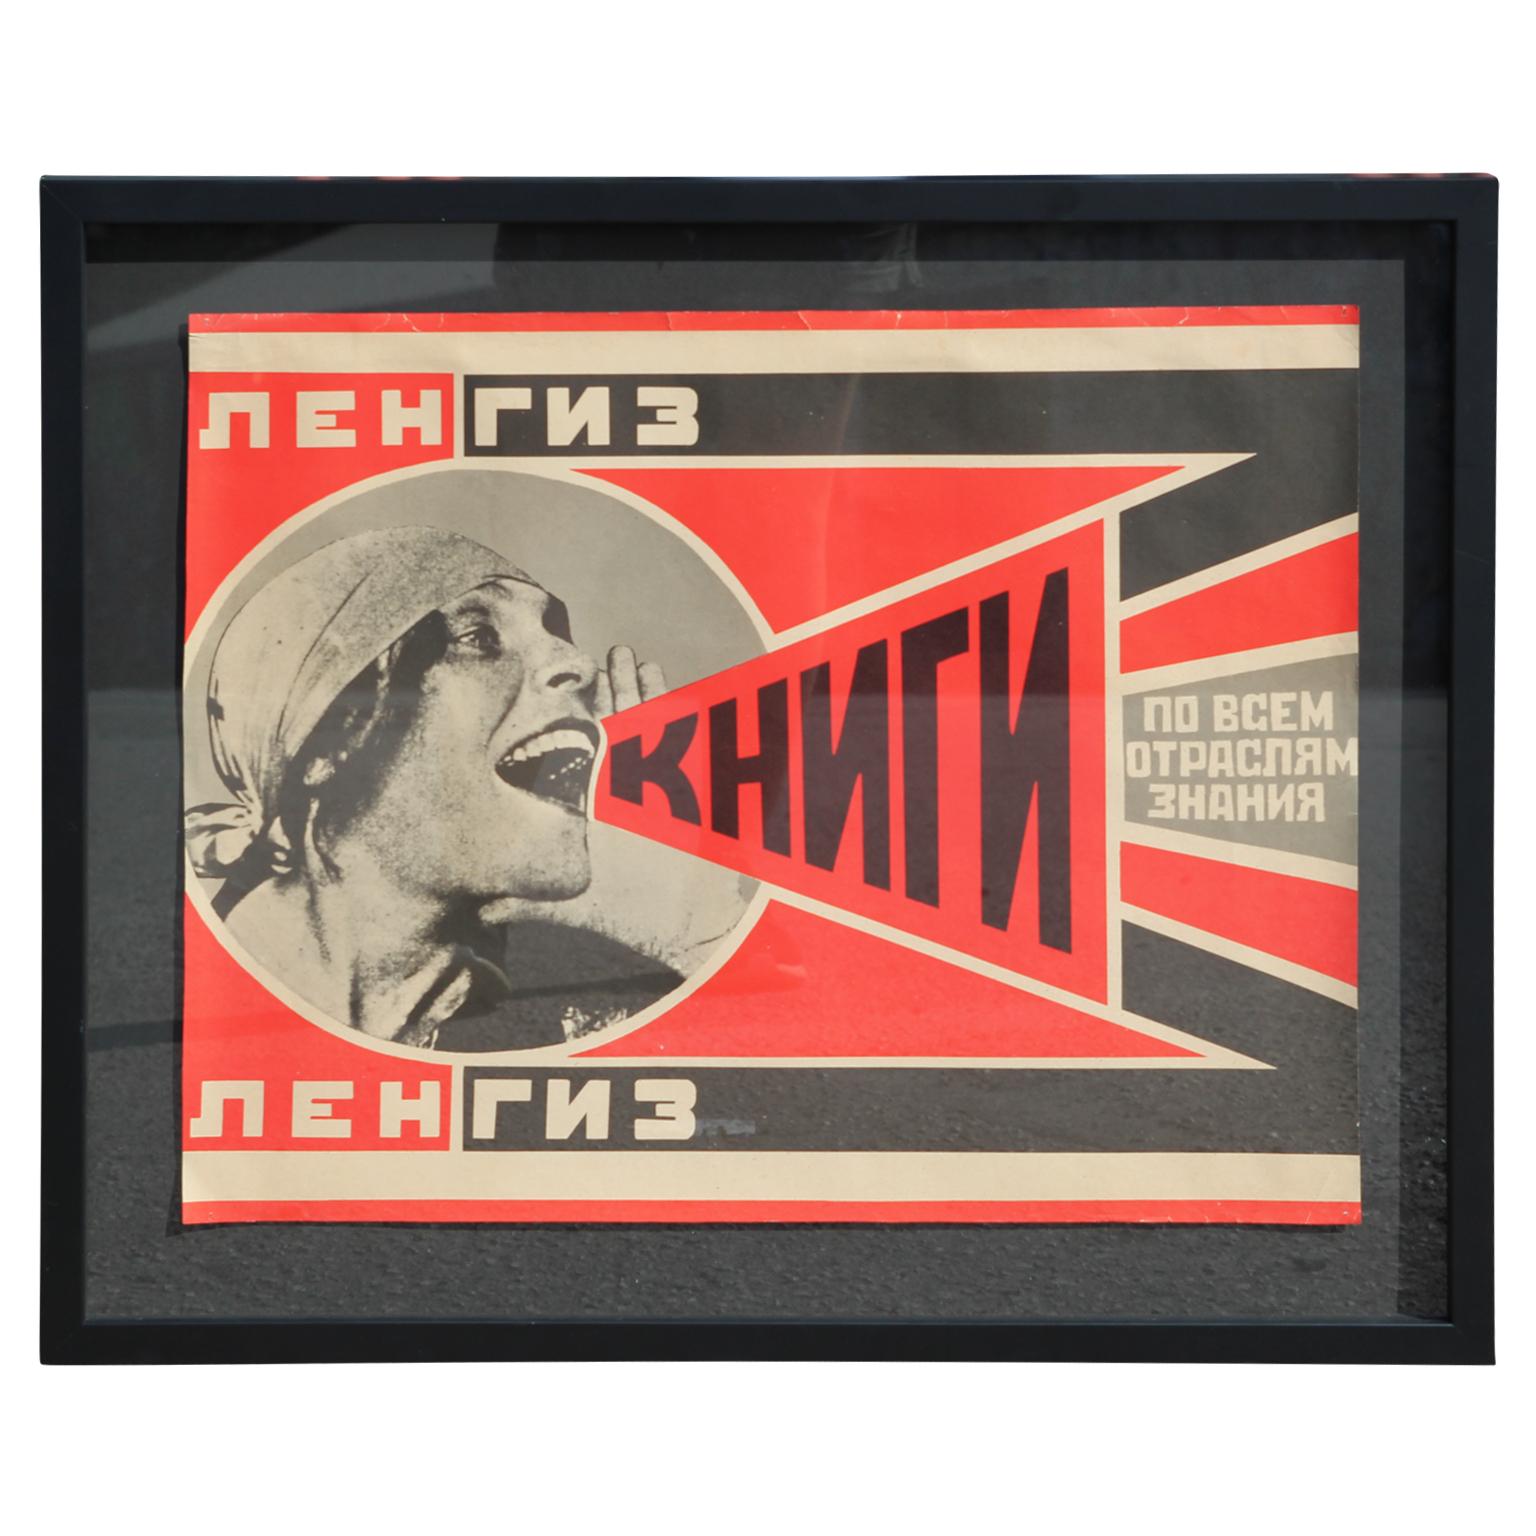 Alexander Rodchenko Abstract Print - "Lengiz- Books in All Branches of Knowledge" Soviet Russia Constructivist Poster